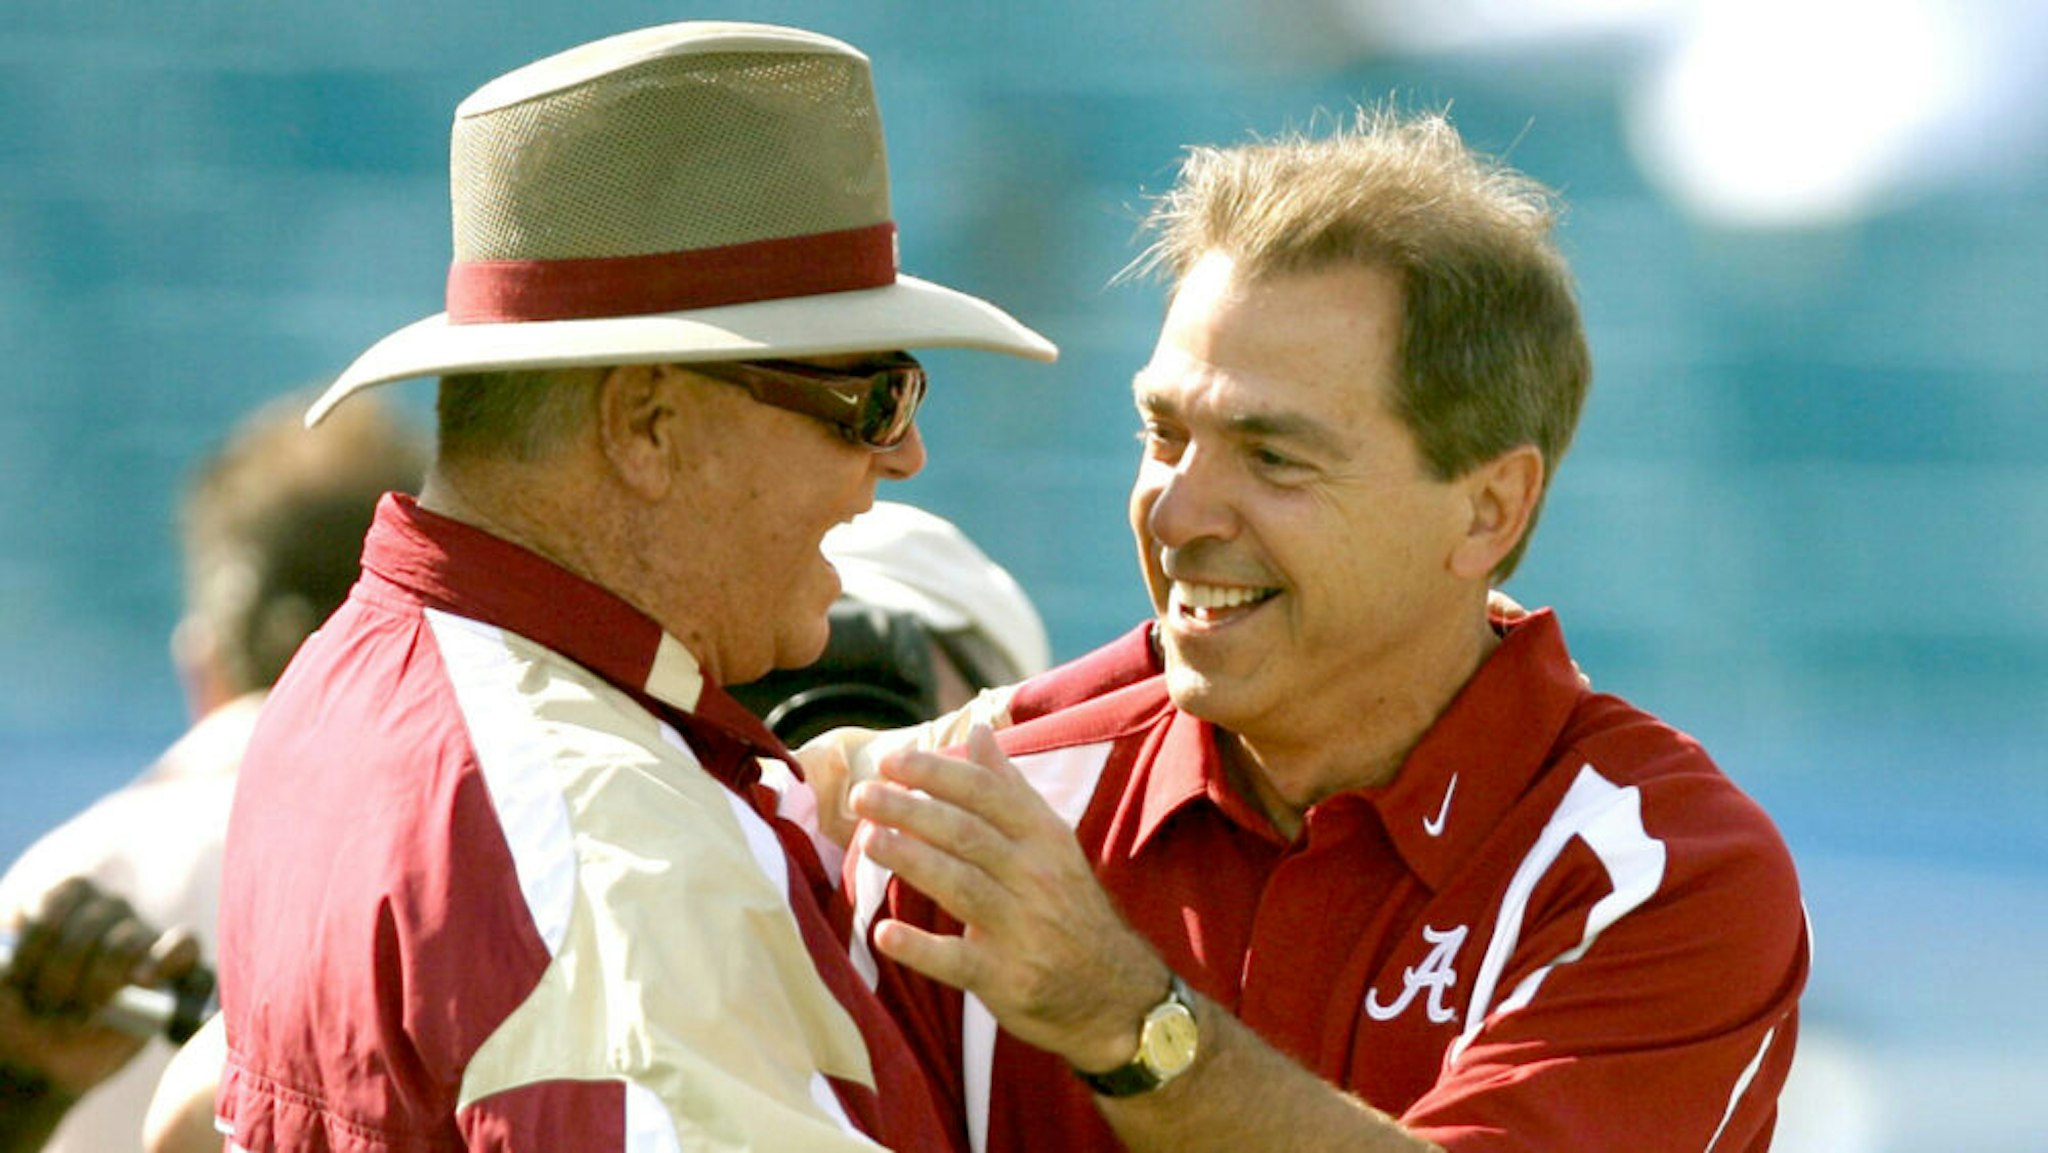 Florida State head coach Bobby Bowden, left, and Alabama head coach Nick Saban embrace before the start of the Florida State University versus Alabama college football game at Jacksonville Municipal Stadium on Saturday, September 29, 2007, in Jacksonville, Florida.